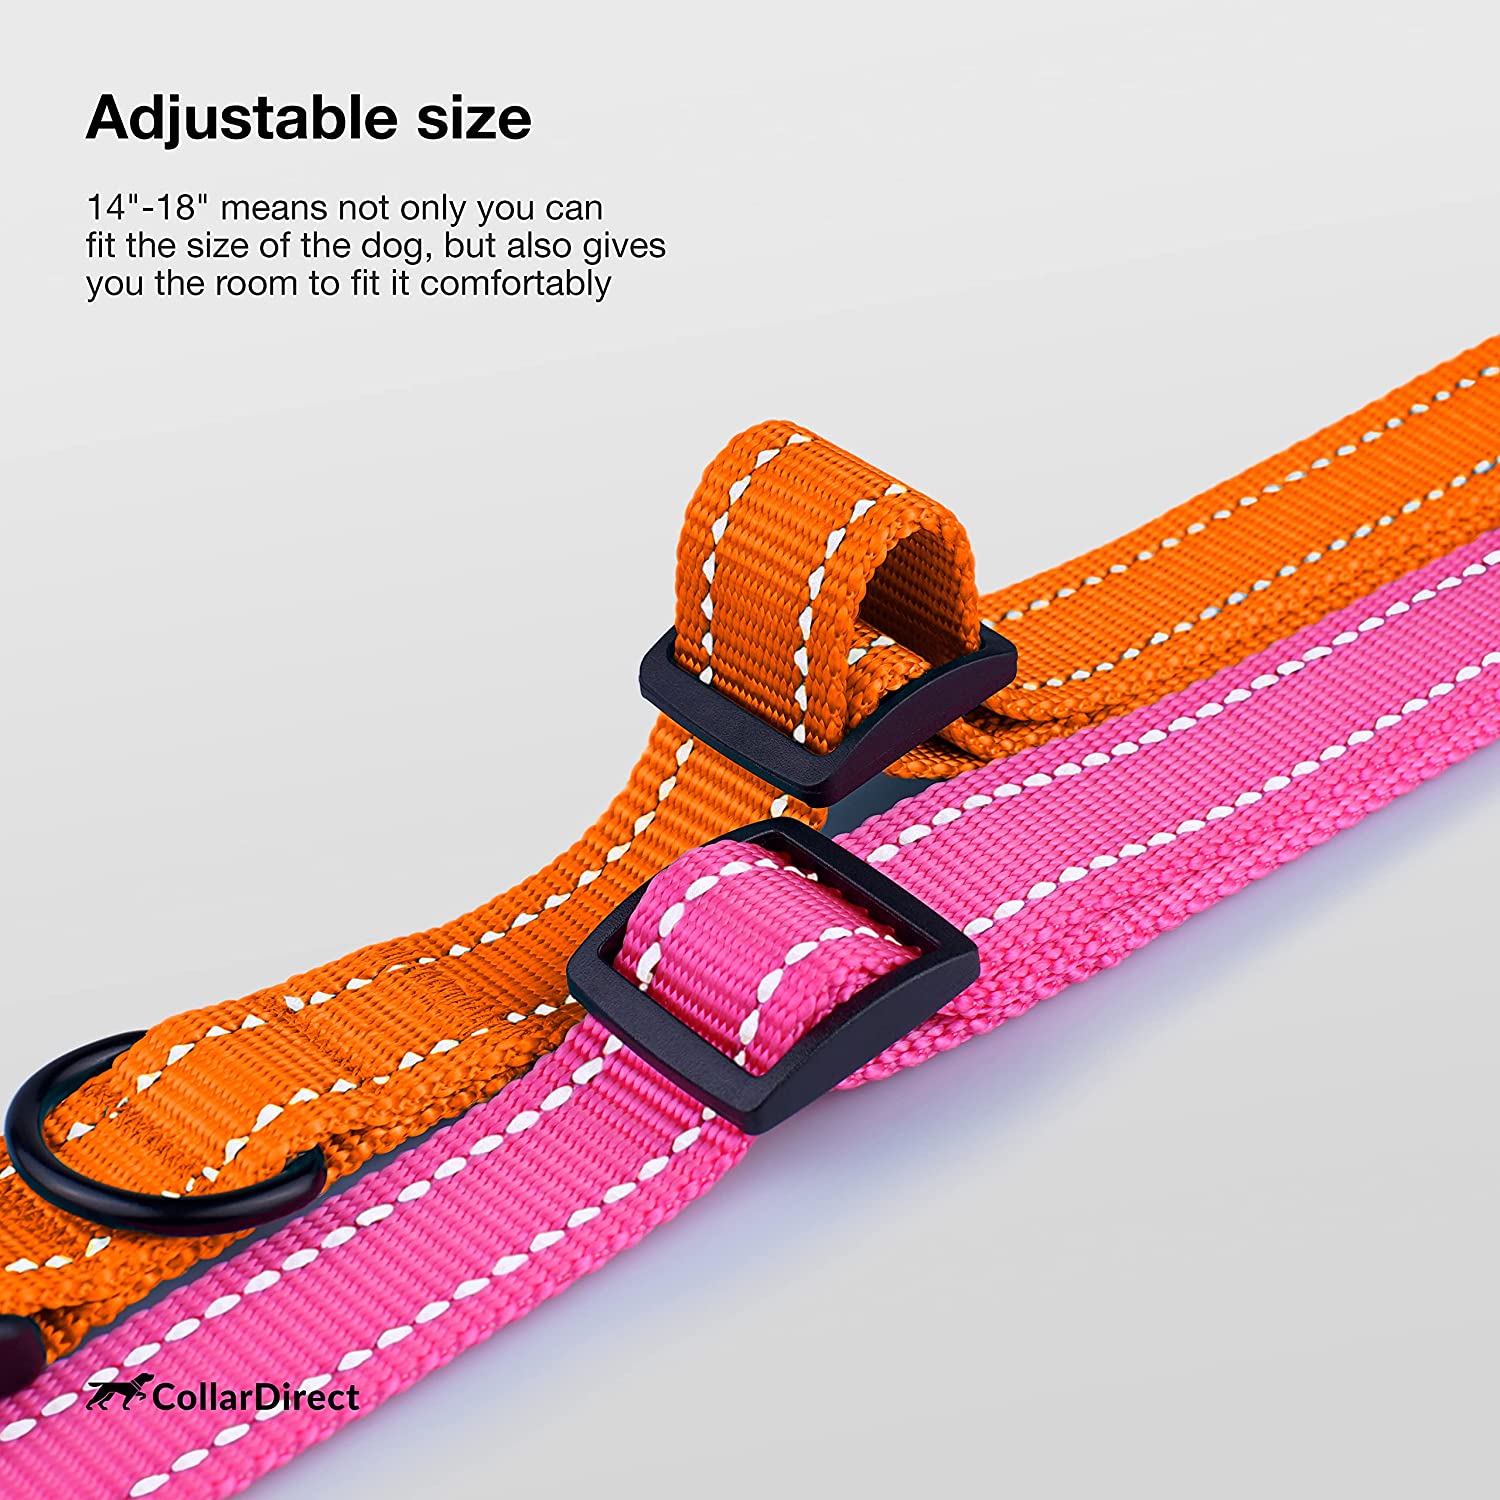 CollarDirect Reflective Dog Collar Safety Nylon Collars for X Large Dogs with Buckle, Orange - image 4 of 7